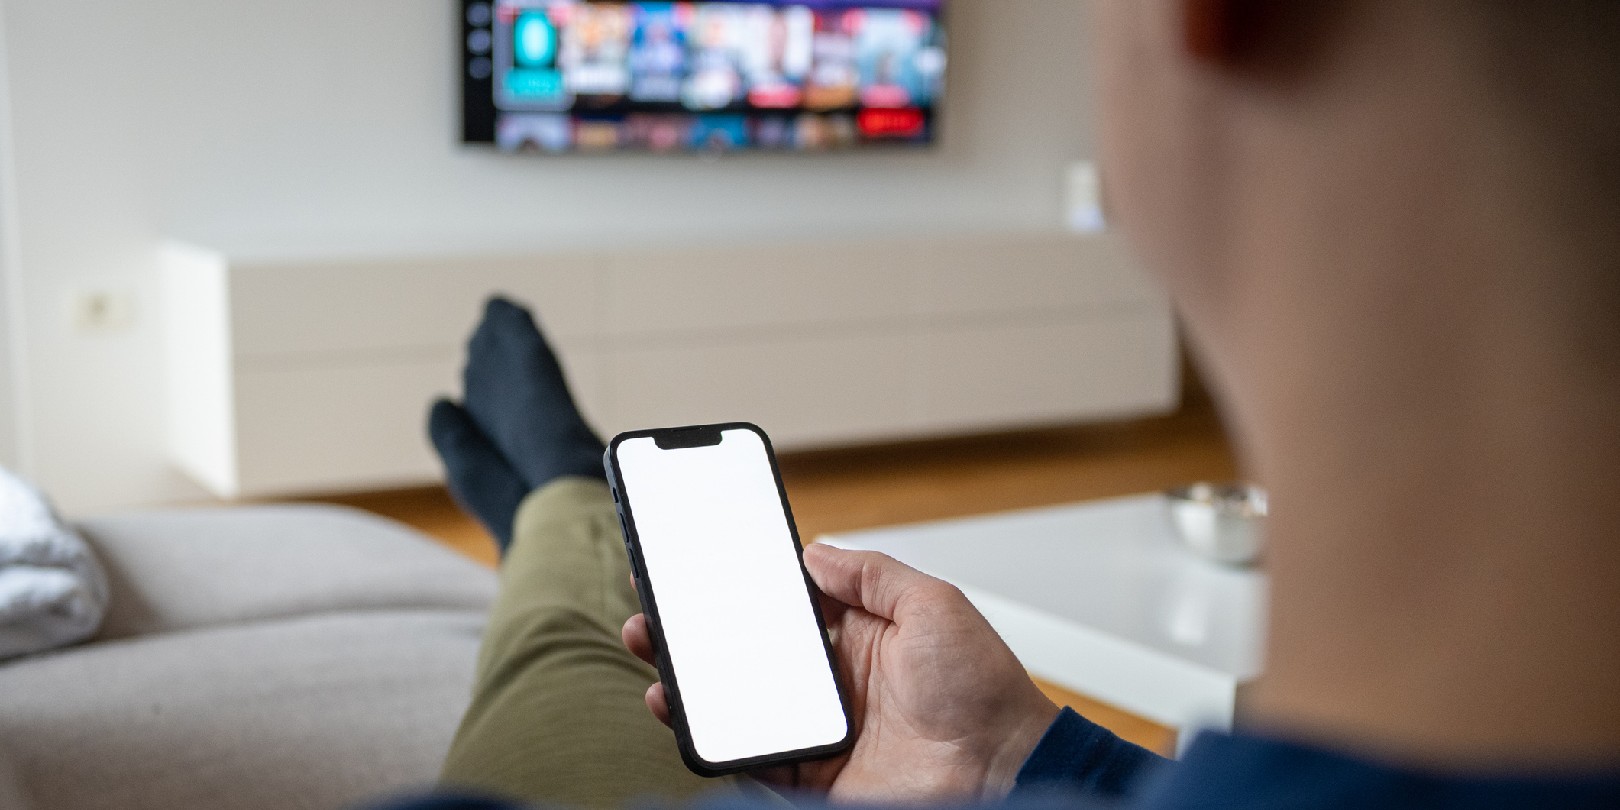 Over the shoulder view of a caucasian man holding a smart phone with a white screen while watching TV.